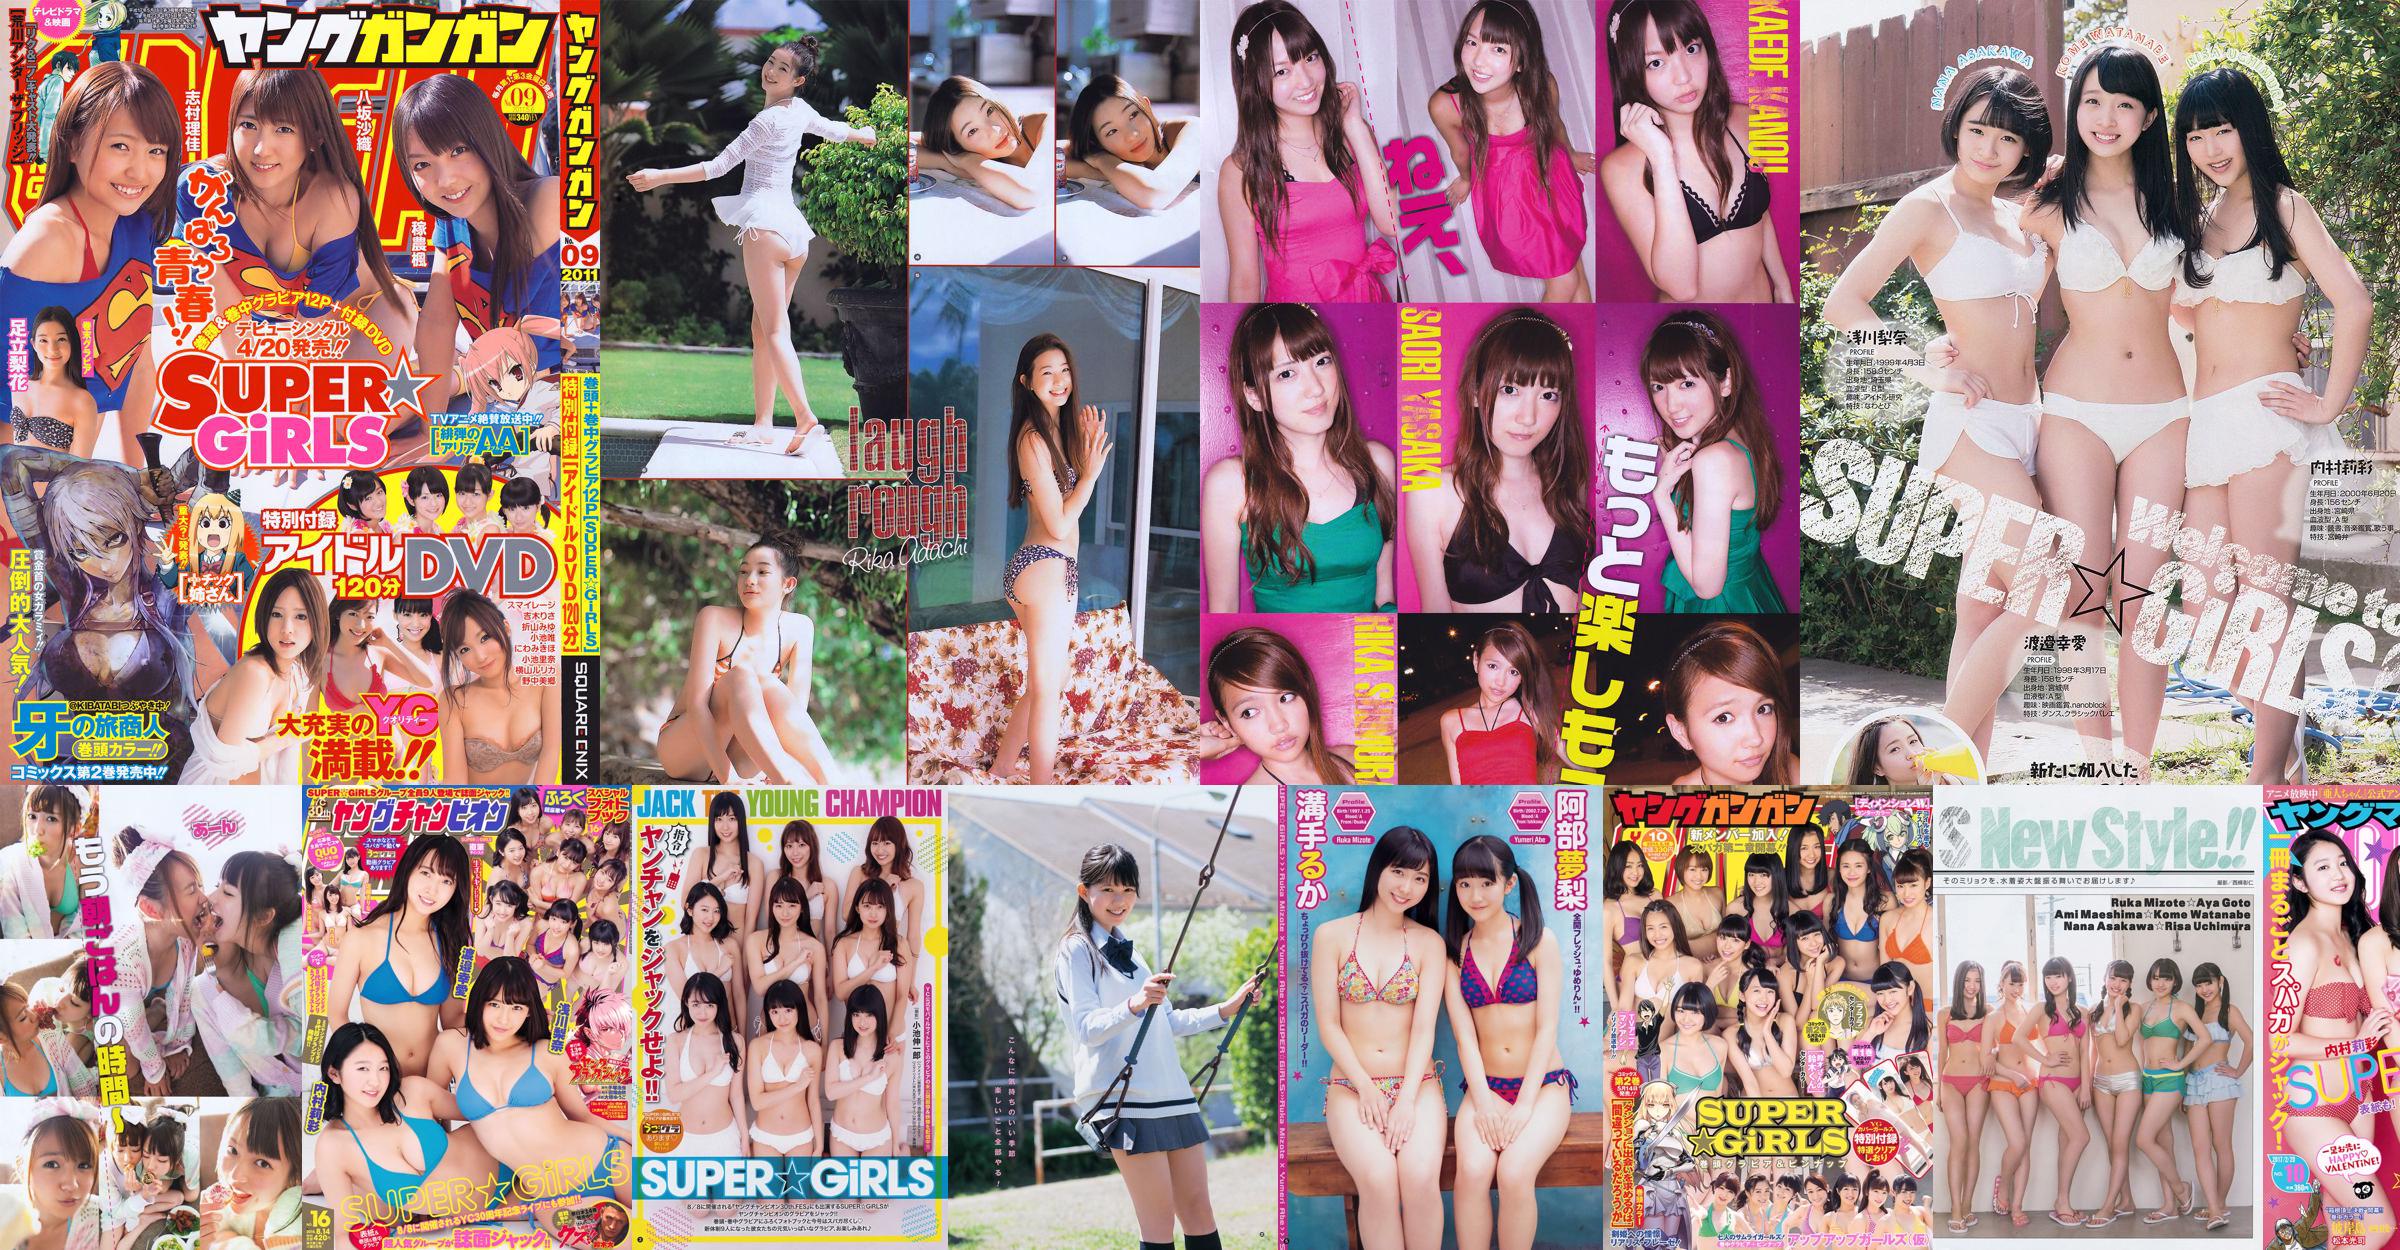 [Bomb.TV] July 2011 issue SUPER☆GiRLS No.b2960a Page 5